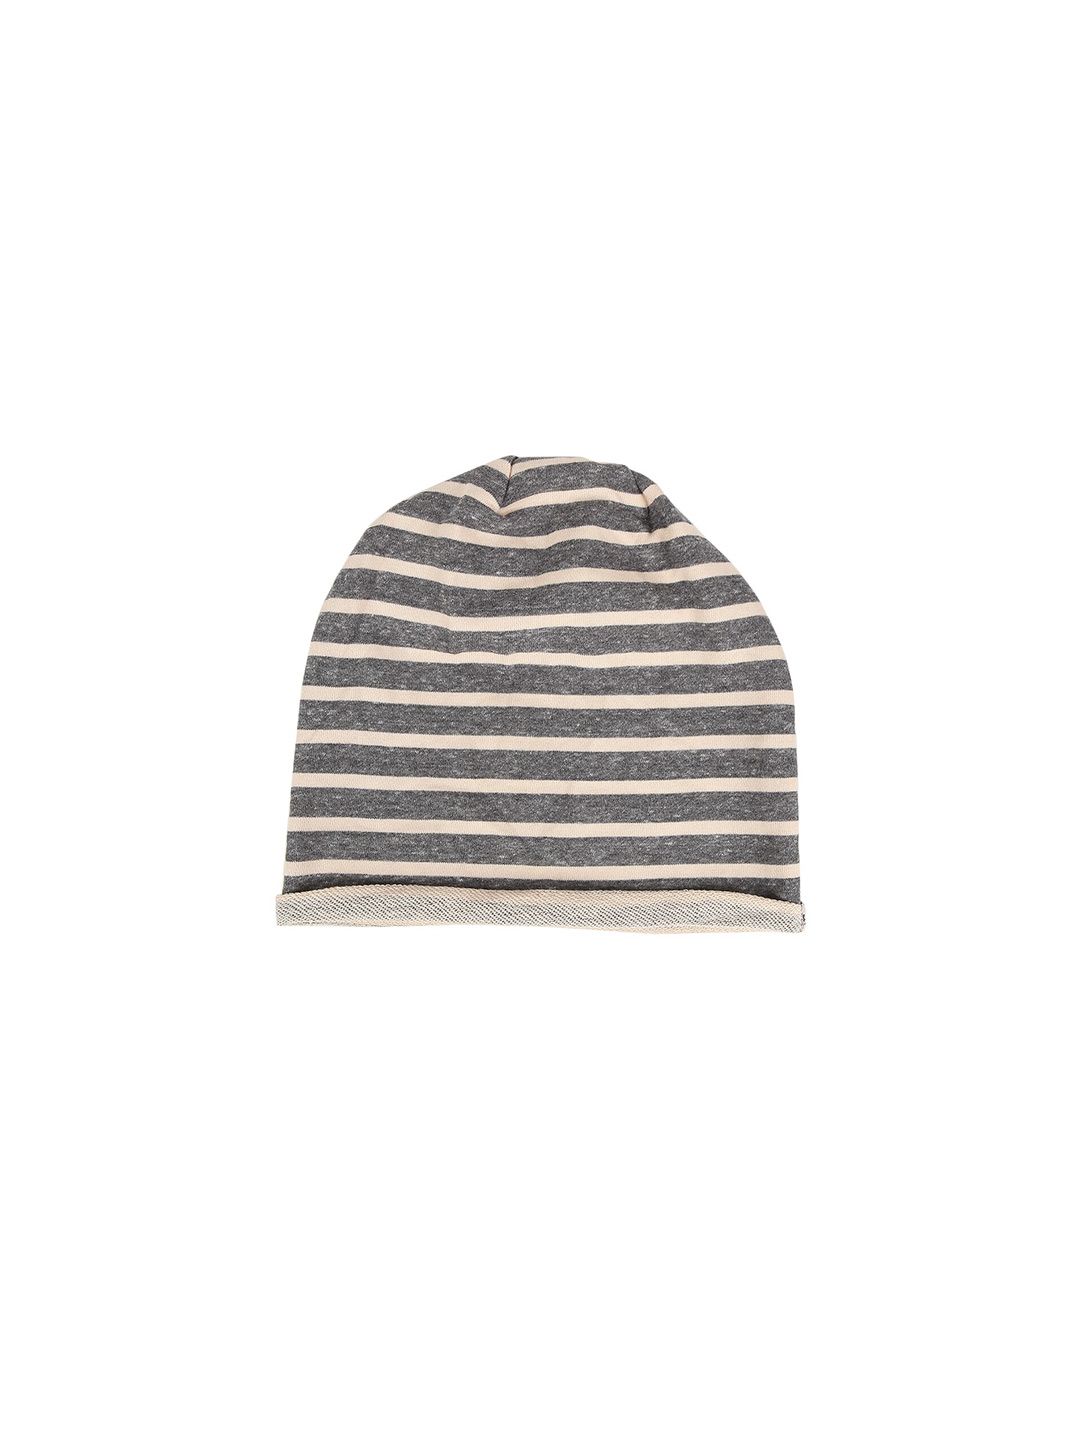 iSWEVEN Unisex Yellow & Grey Printed Beanie Price in India